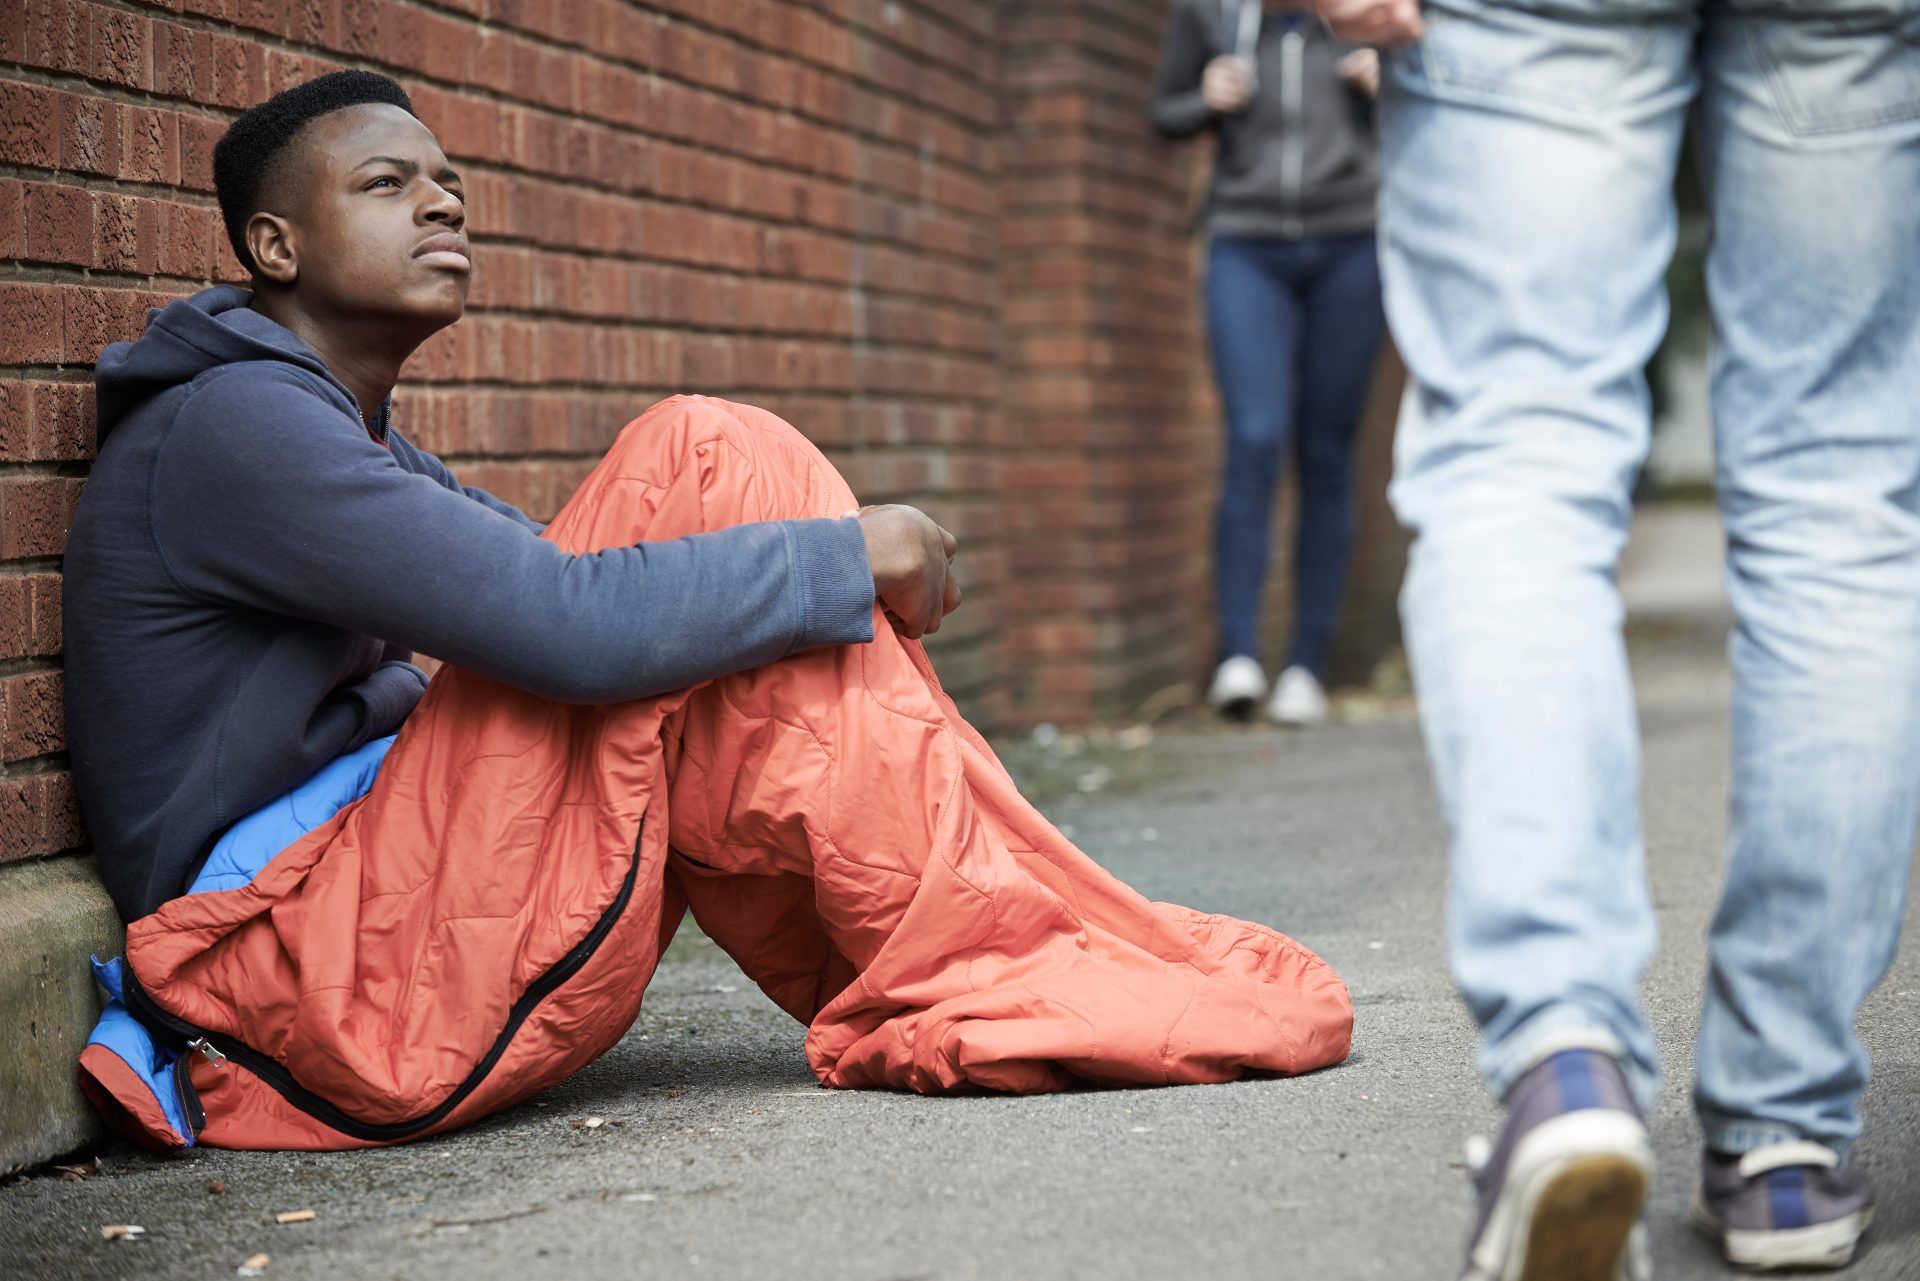 A homeless young man sits on a sidewalk with his legs inside an orange sleeping bag - homeless youth